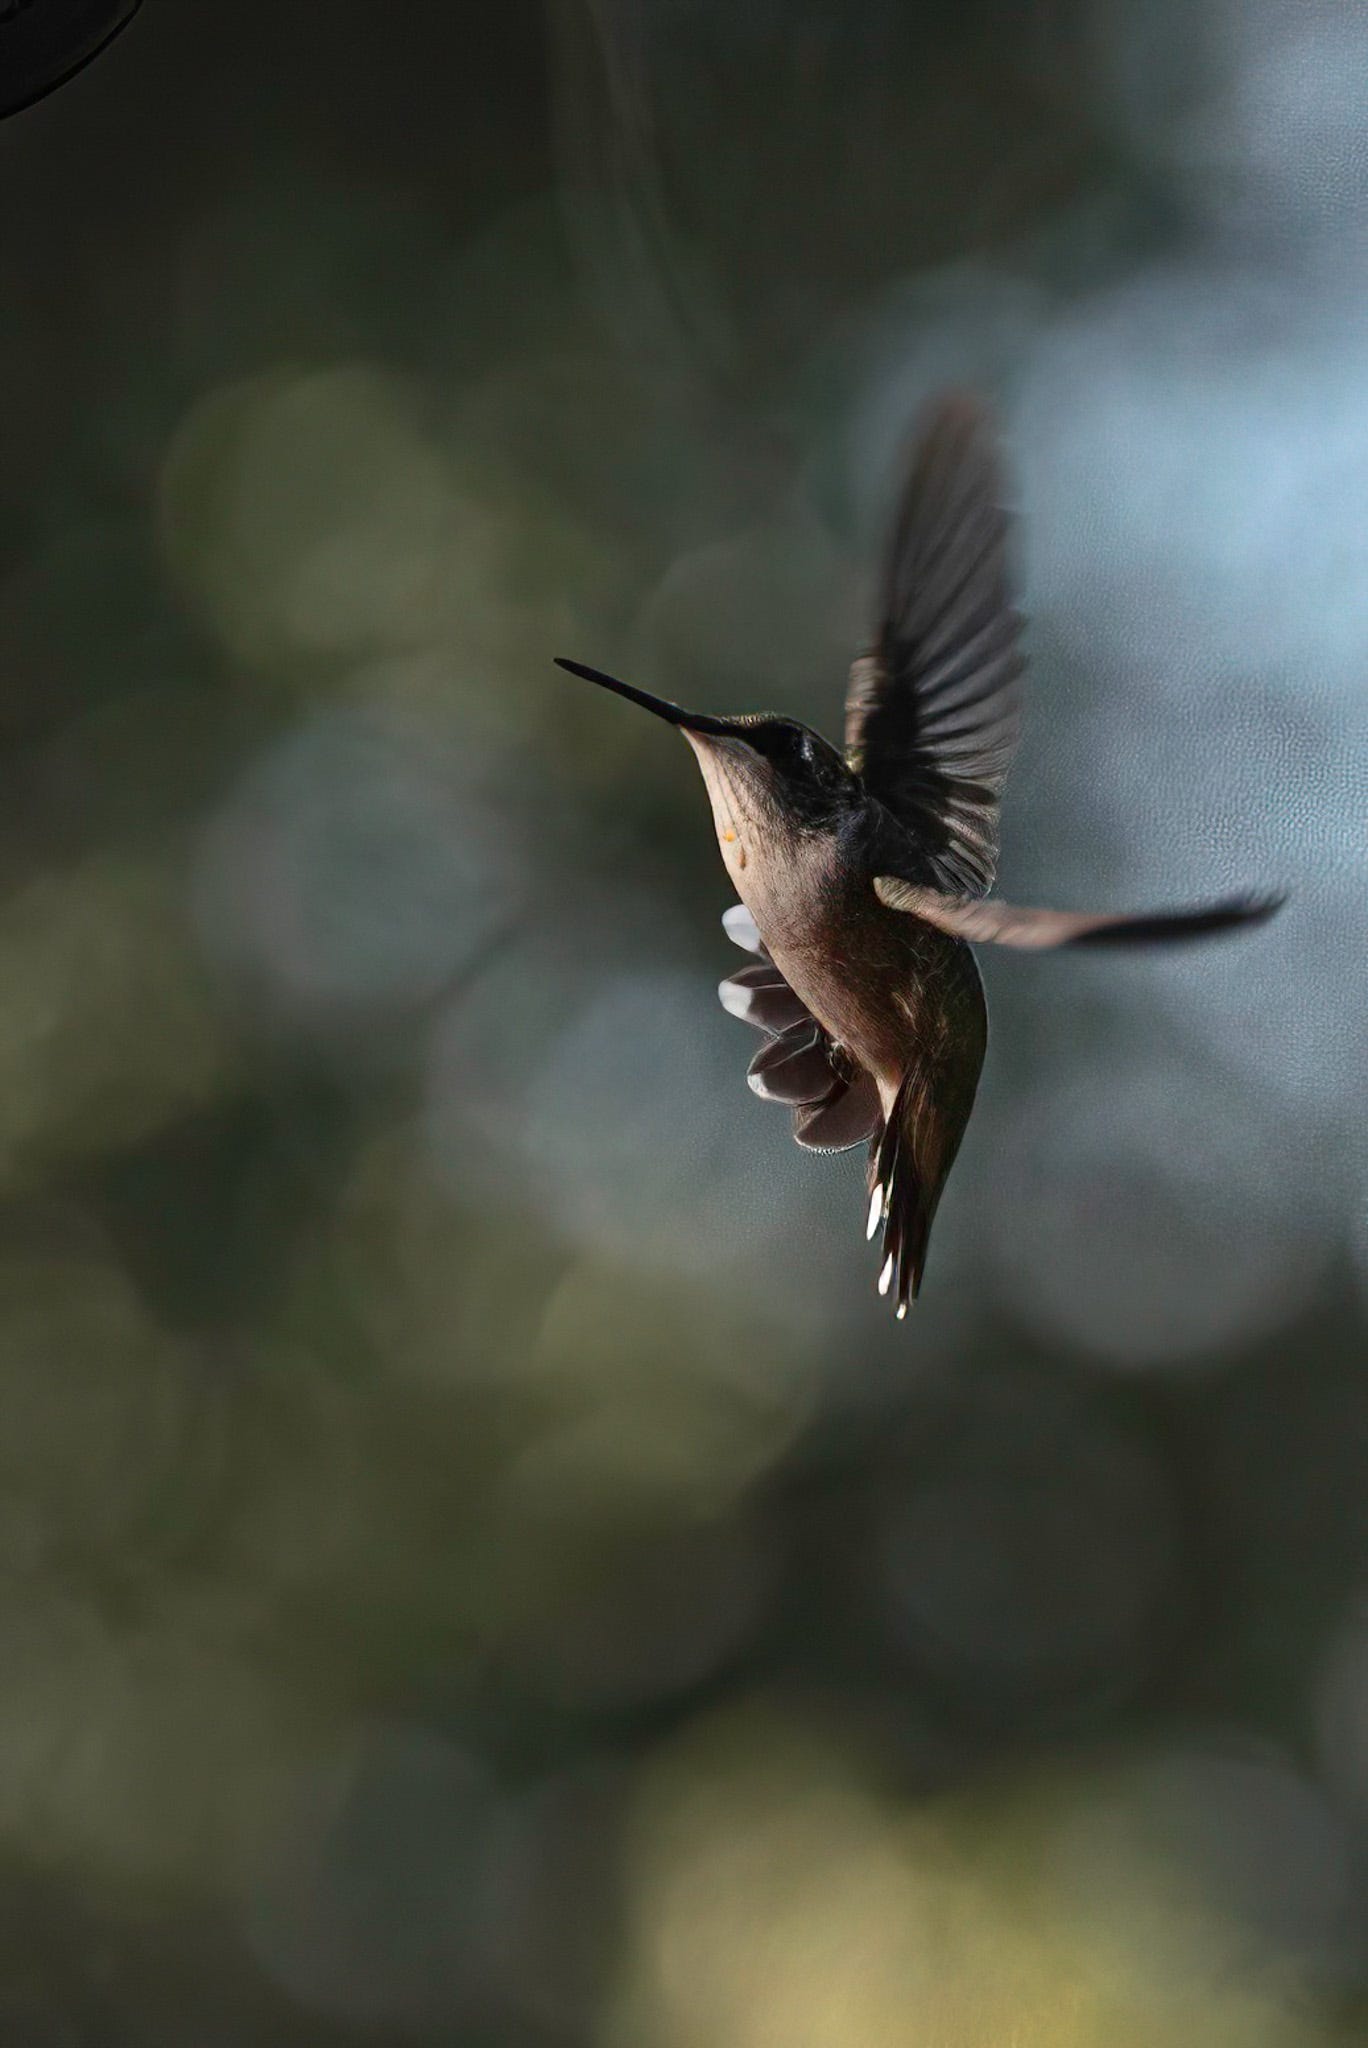 A Rufous Hummingbird caught in flight, wings extended against a bokeh background of greens and blues